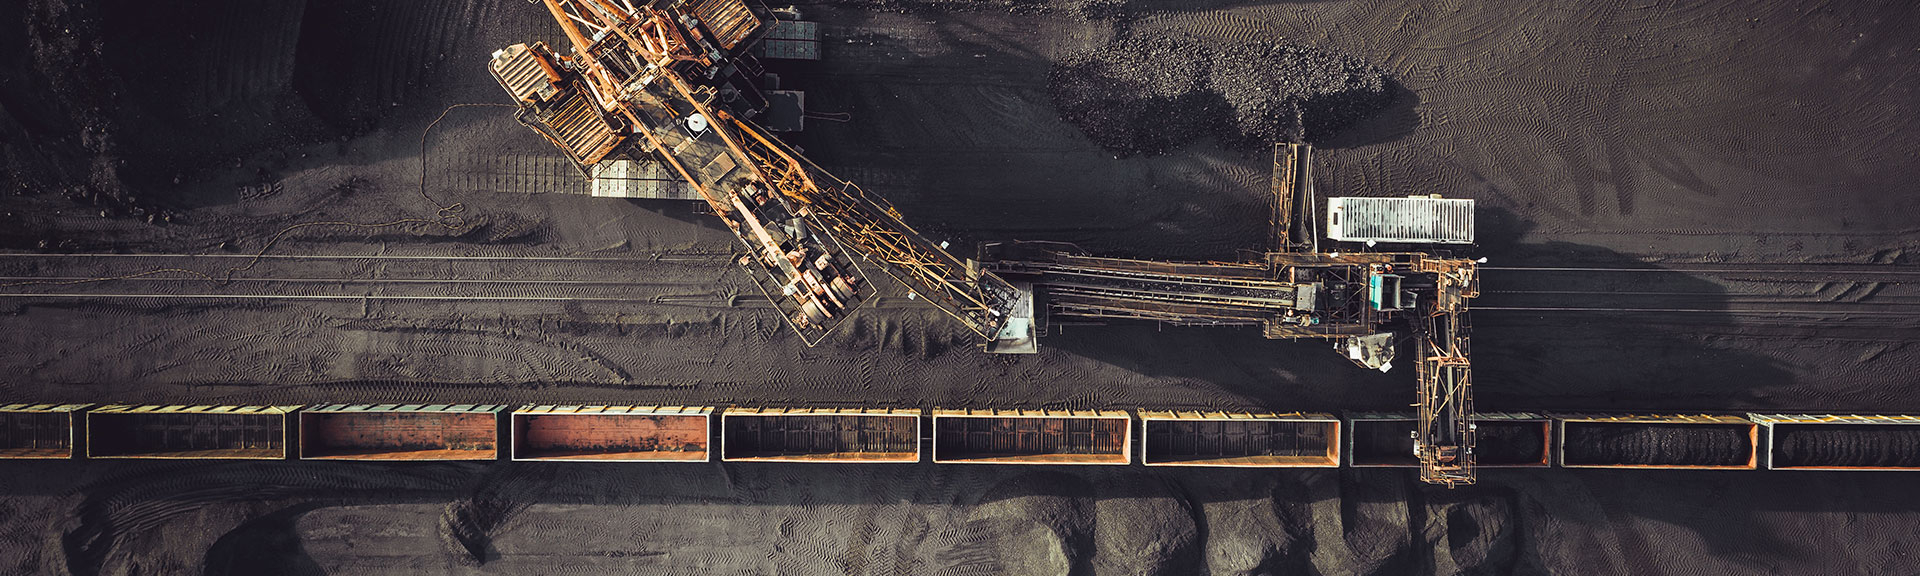 Mining and M&A: What’s driving the trend in 2019?